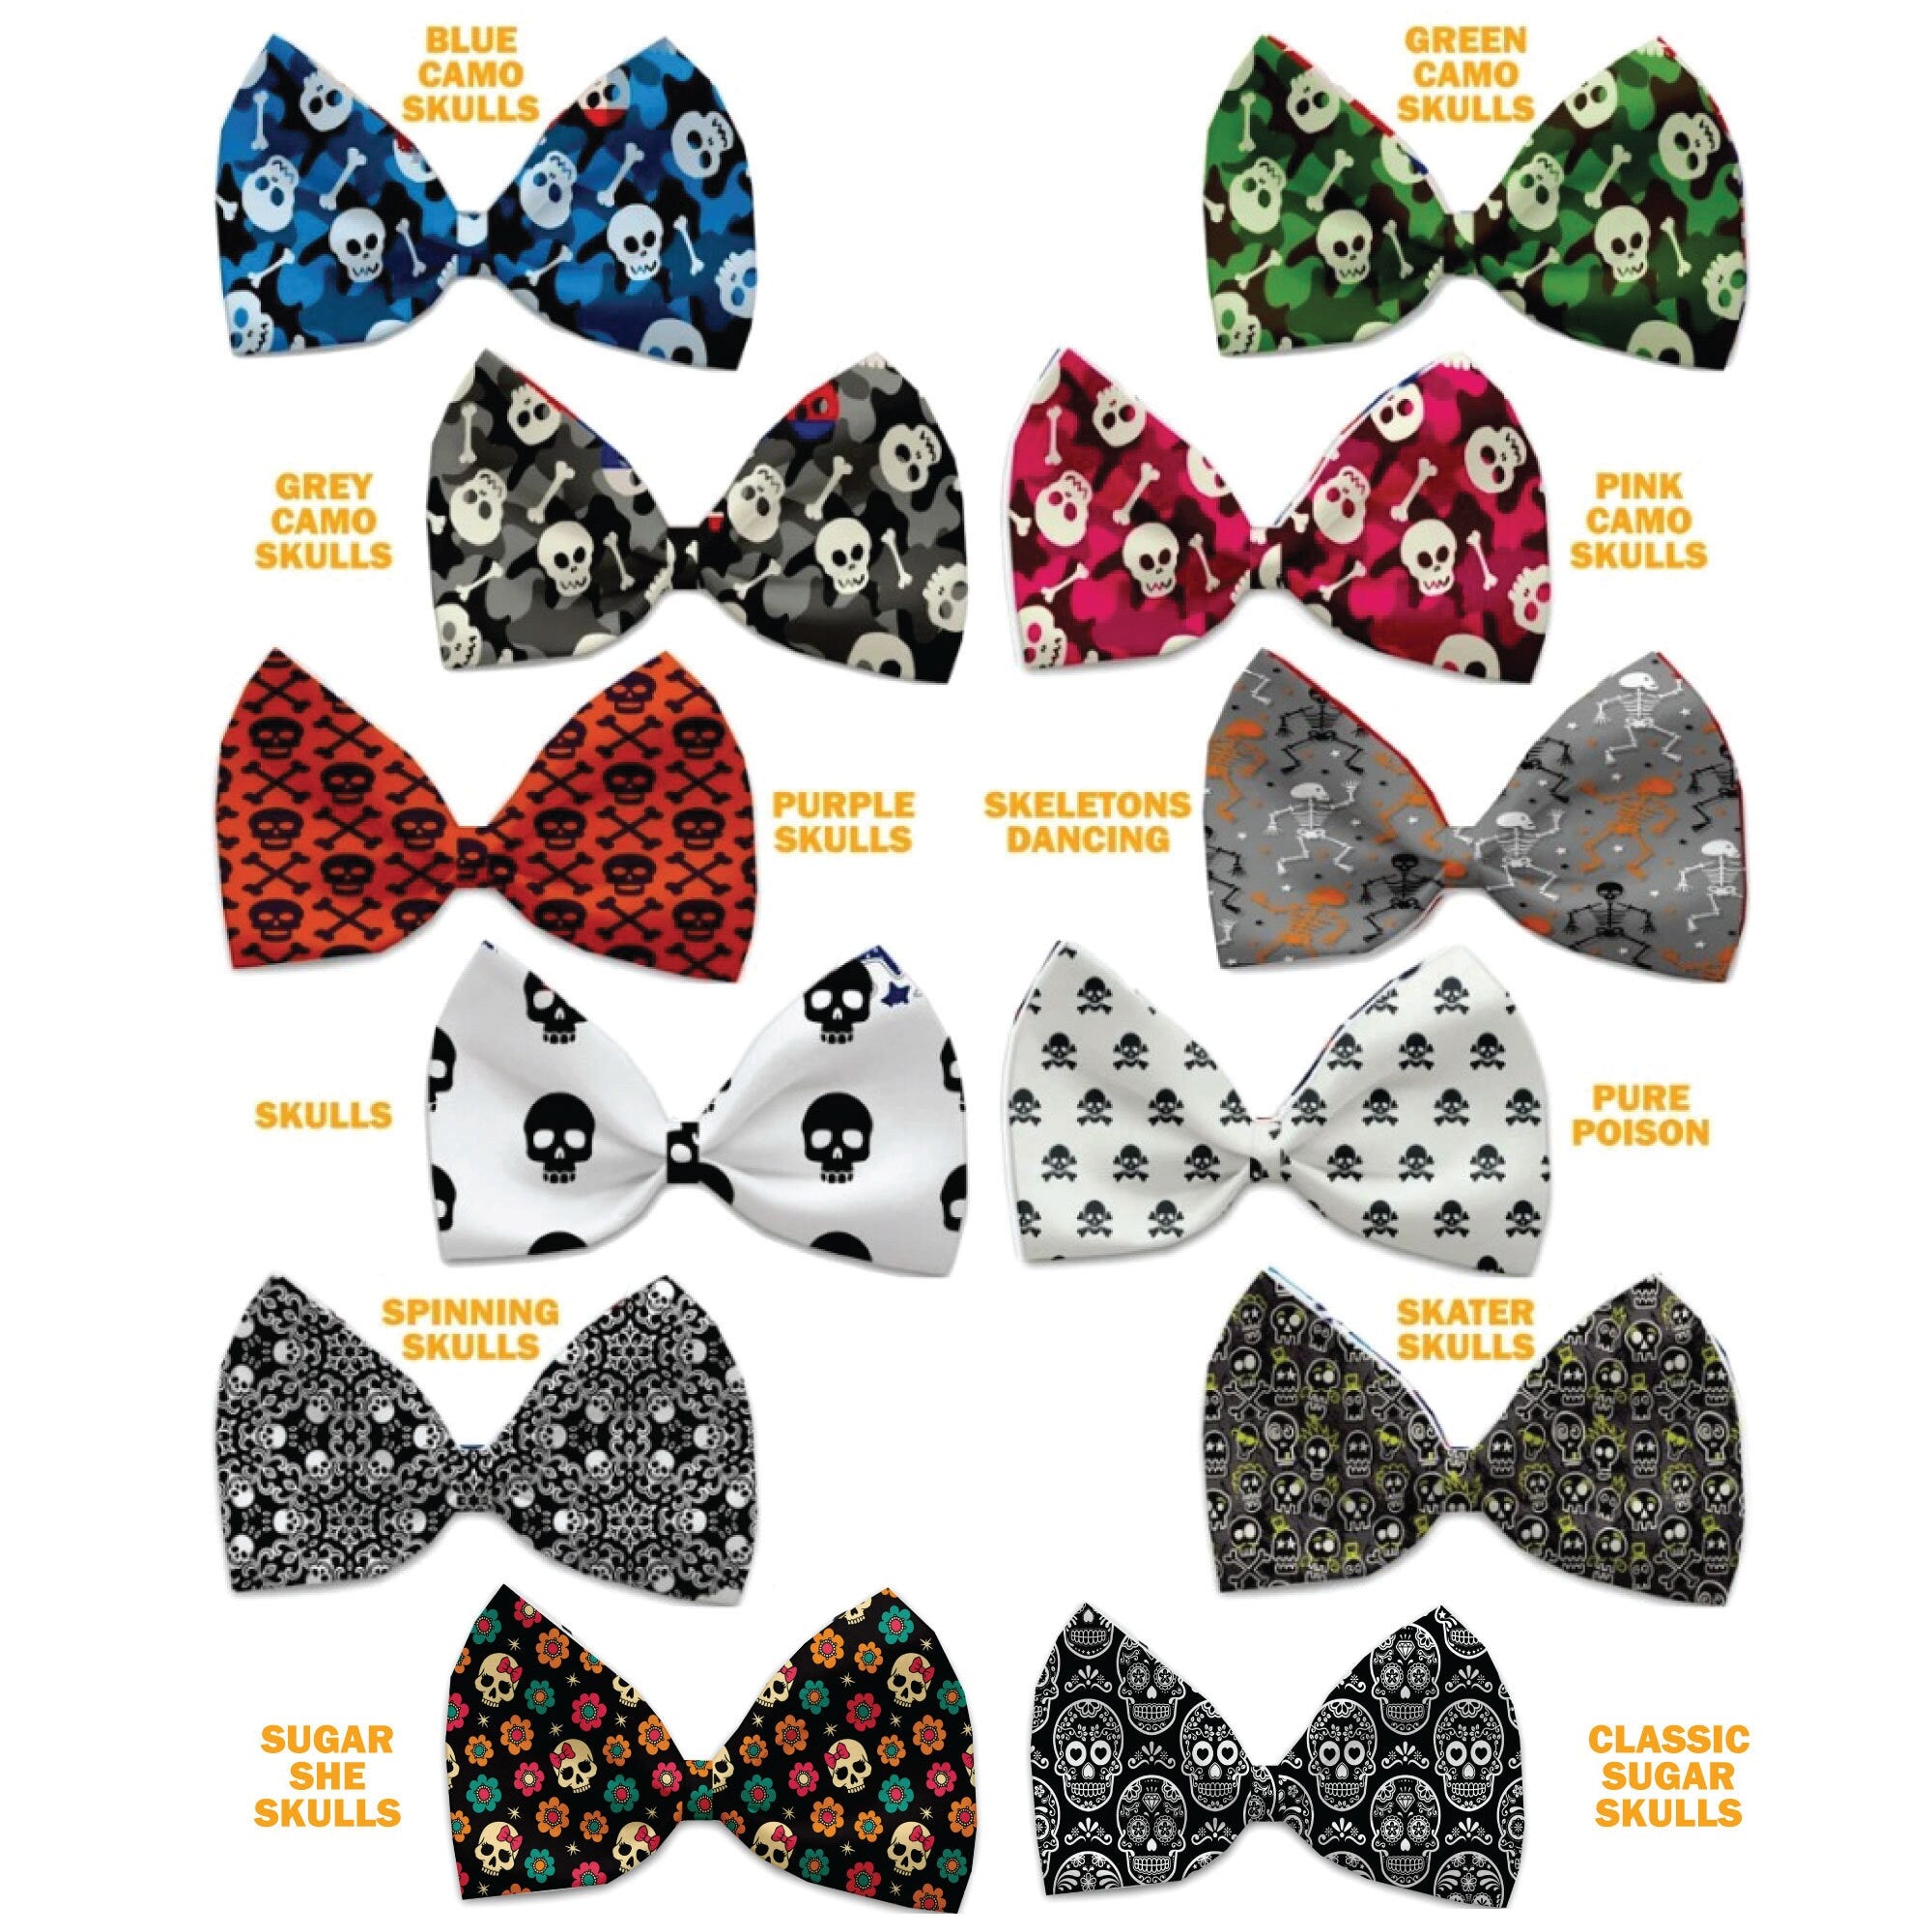 Halloween Pet, Dog and Cat Bow Ties, "Trick-Or-Treat Group" *Available in 10 different pattern options!*